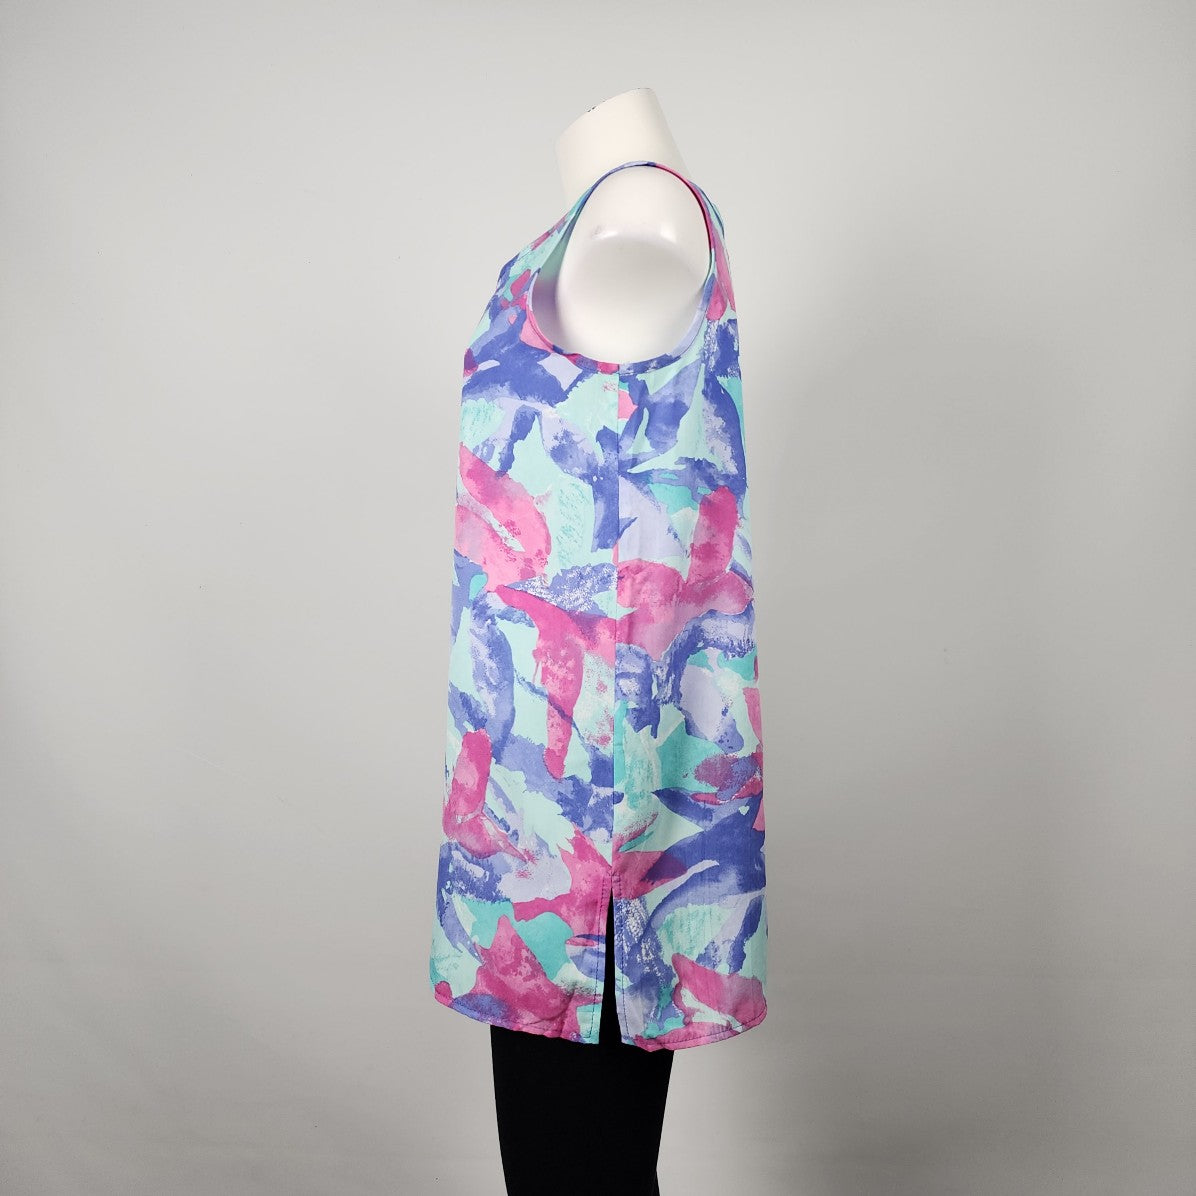 Vintage Mr. Max Pink Floral Sleeveless Top Size M